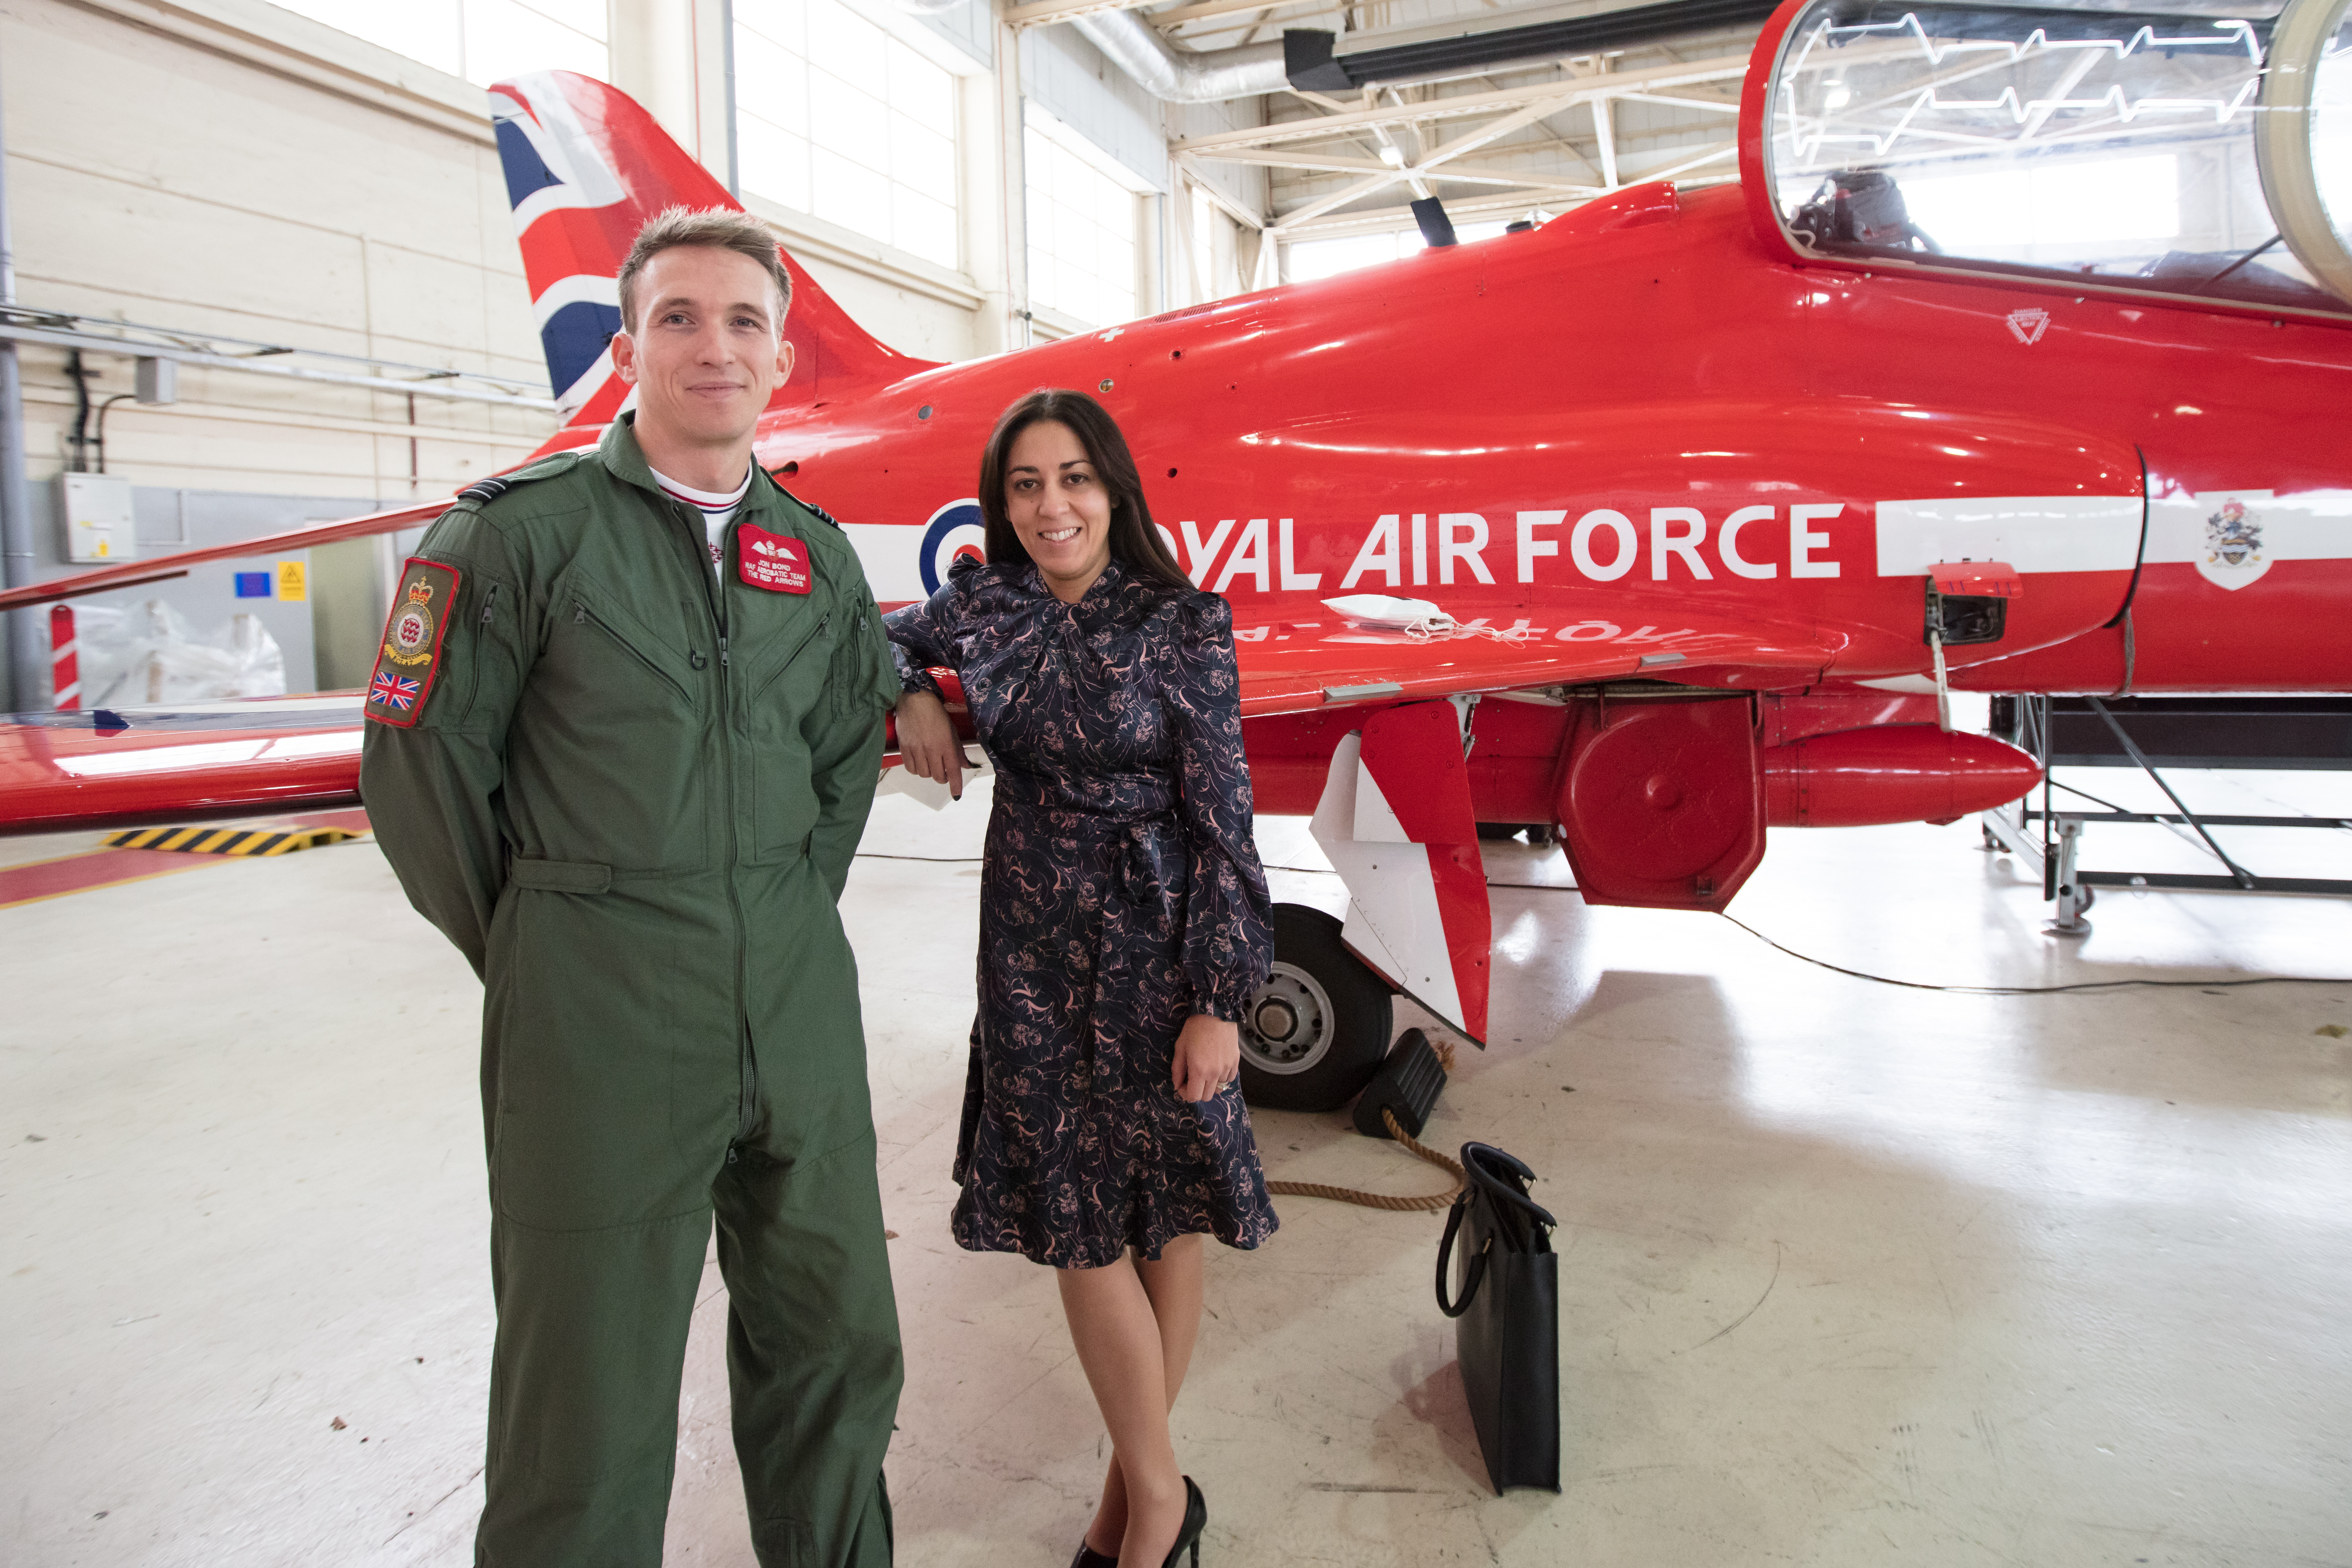 Lady stood next to gentleman in green flight suit with a RAF Red Arrow aeroplane in the background